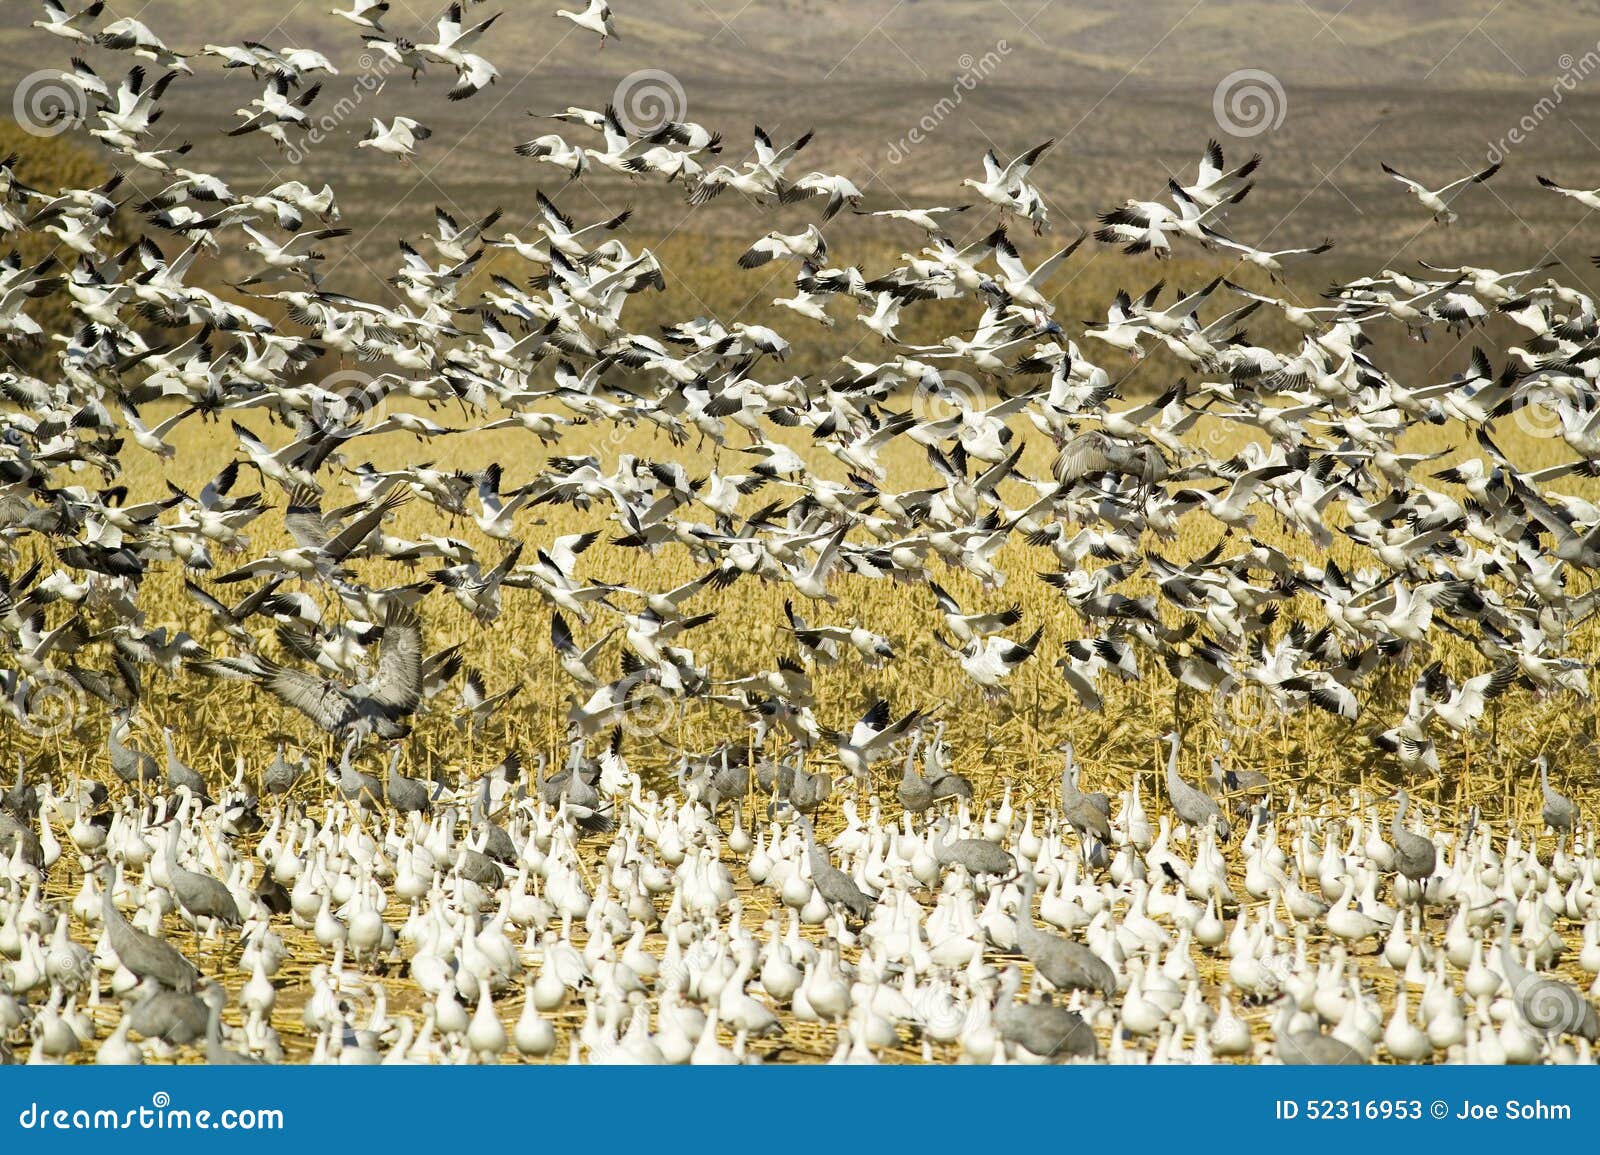 sandhill cranes and snow geese fly over corn field at the bosque del apache national wildlife refuge, near san antonio and socorro